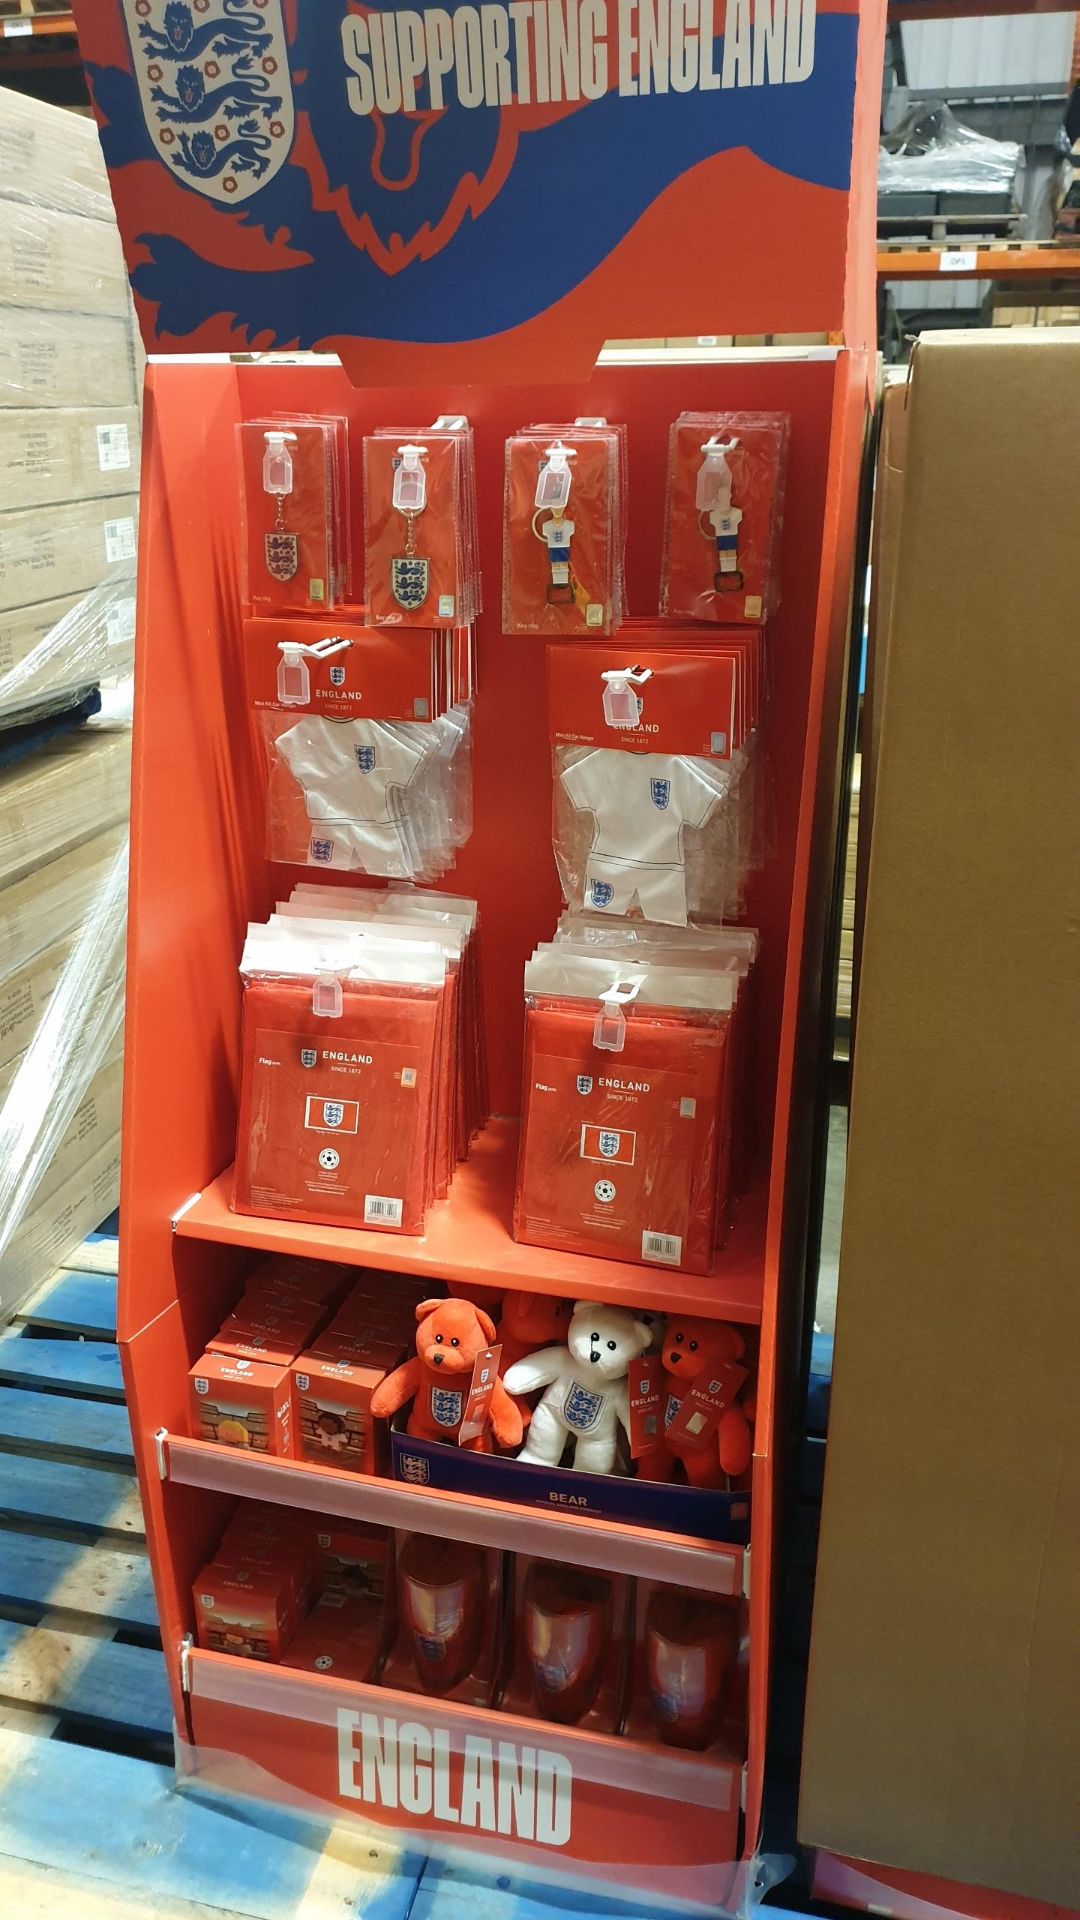 DISPLAY UNIT CONTAINING A LARGE QTY OF OFFICIAL ENGLAND GIFTWARES IE. KEYRINGS, CAR HANGERS, TEDDY